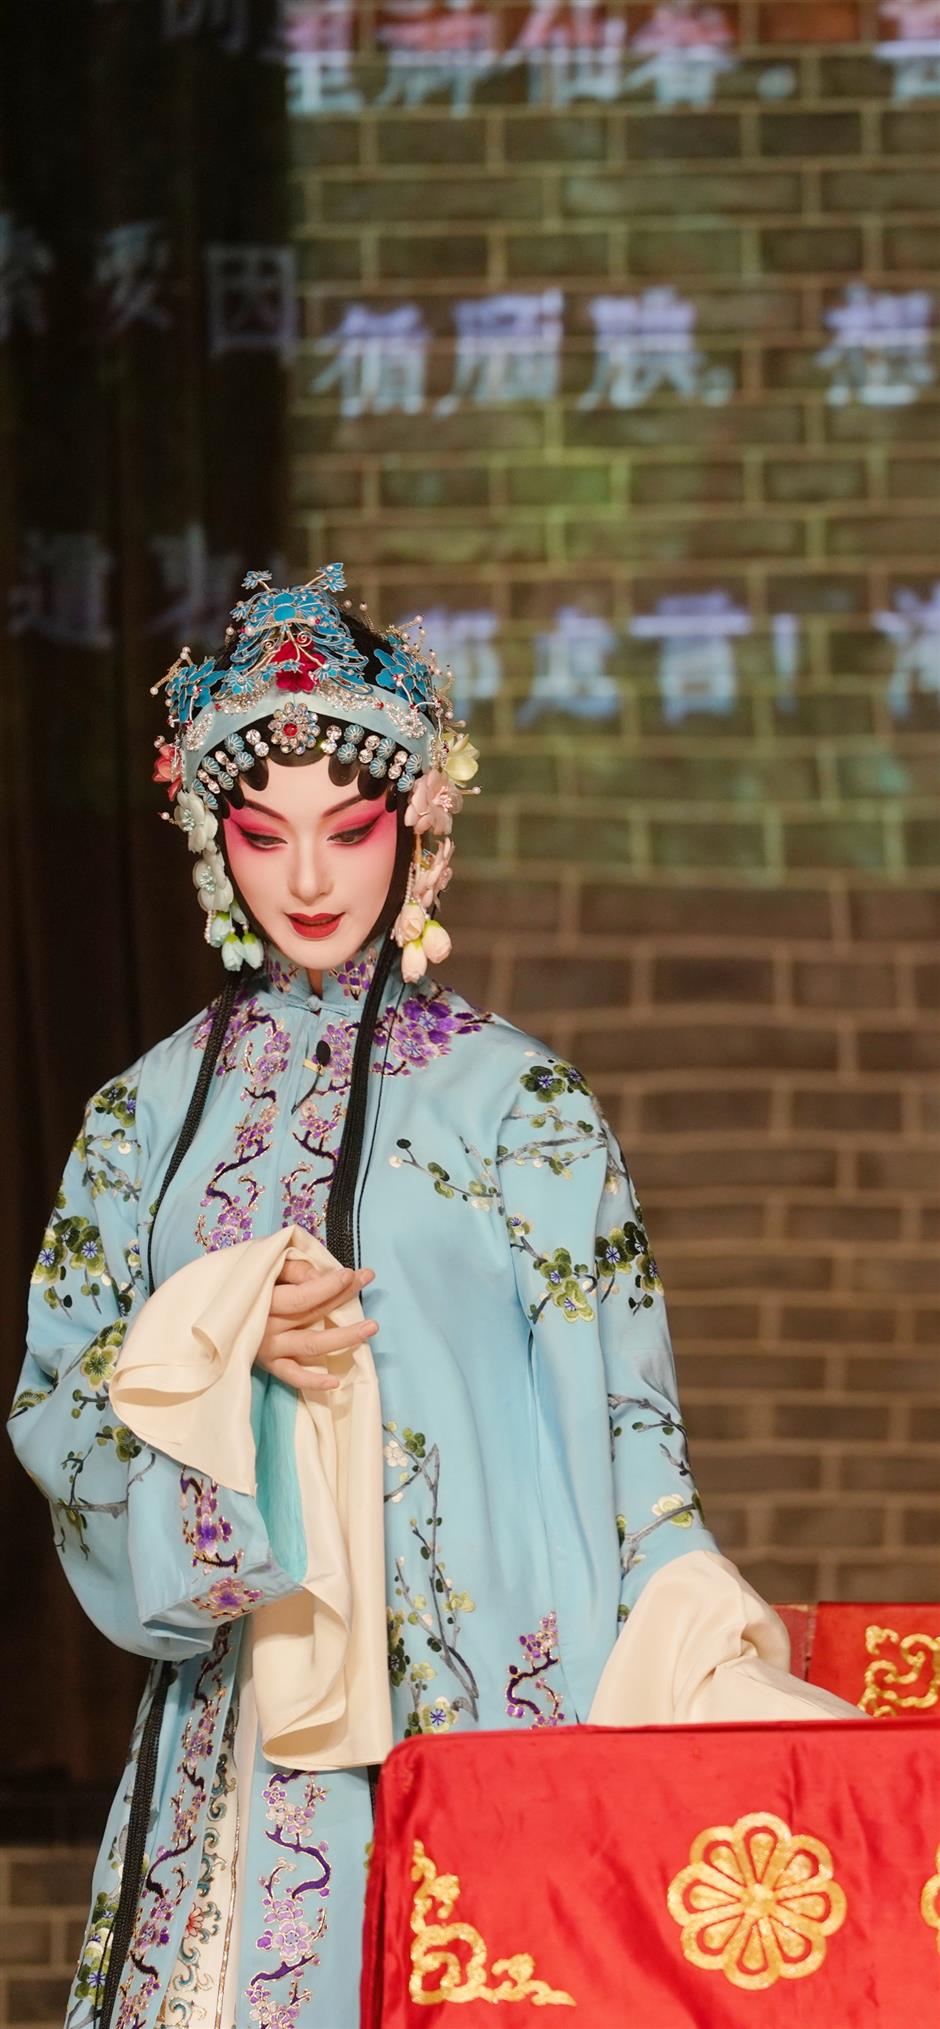 Kunqu Opera performance on song for New Year